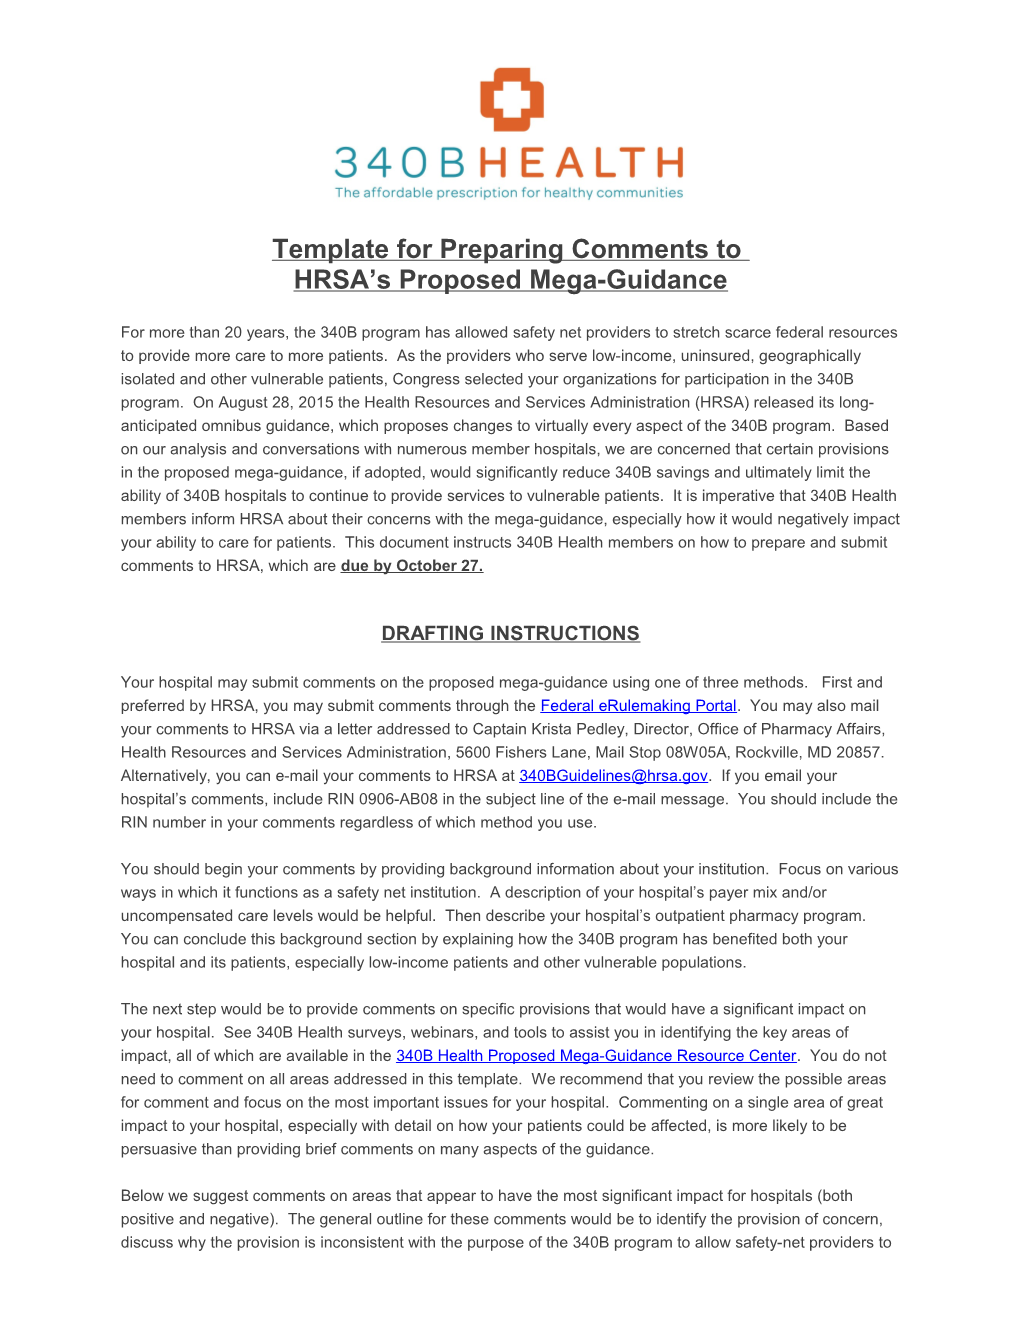 340B Health Comment Template for HRSA S Proposed Guidance